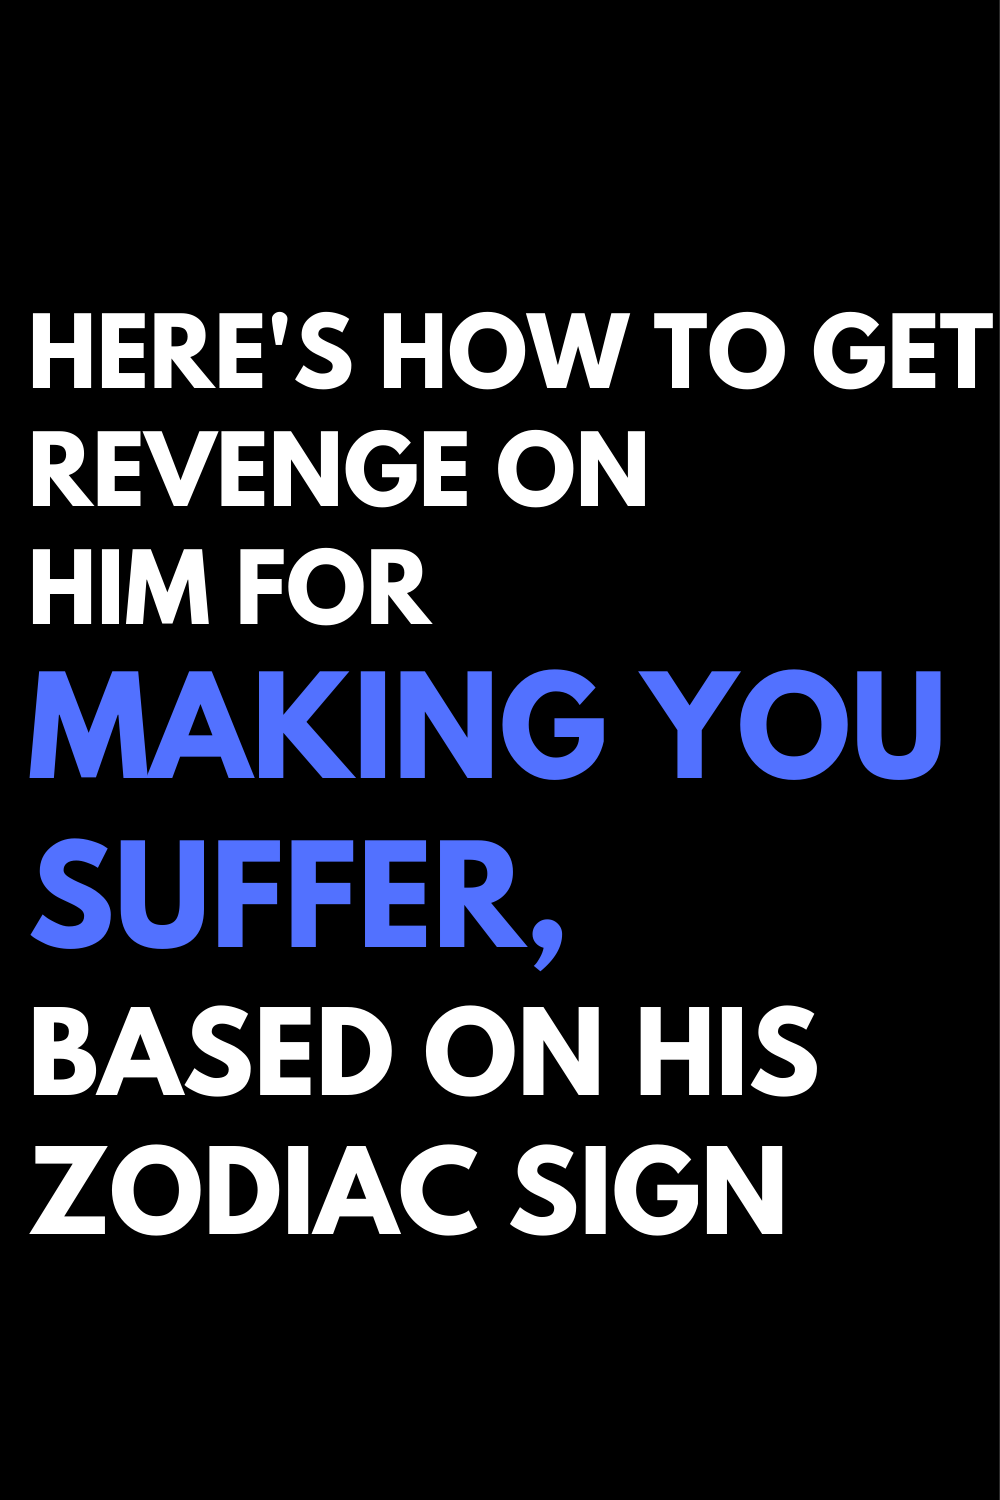 Here's How To Get Revenge On Him For Making You Suffer, Based On His Zodiac Sign